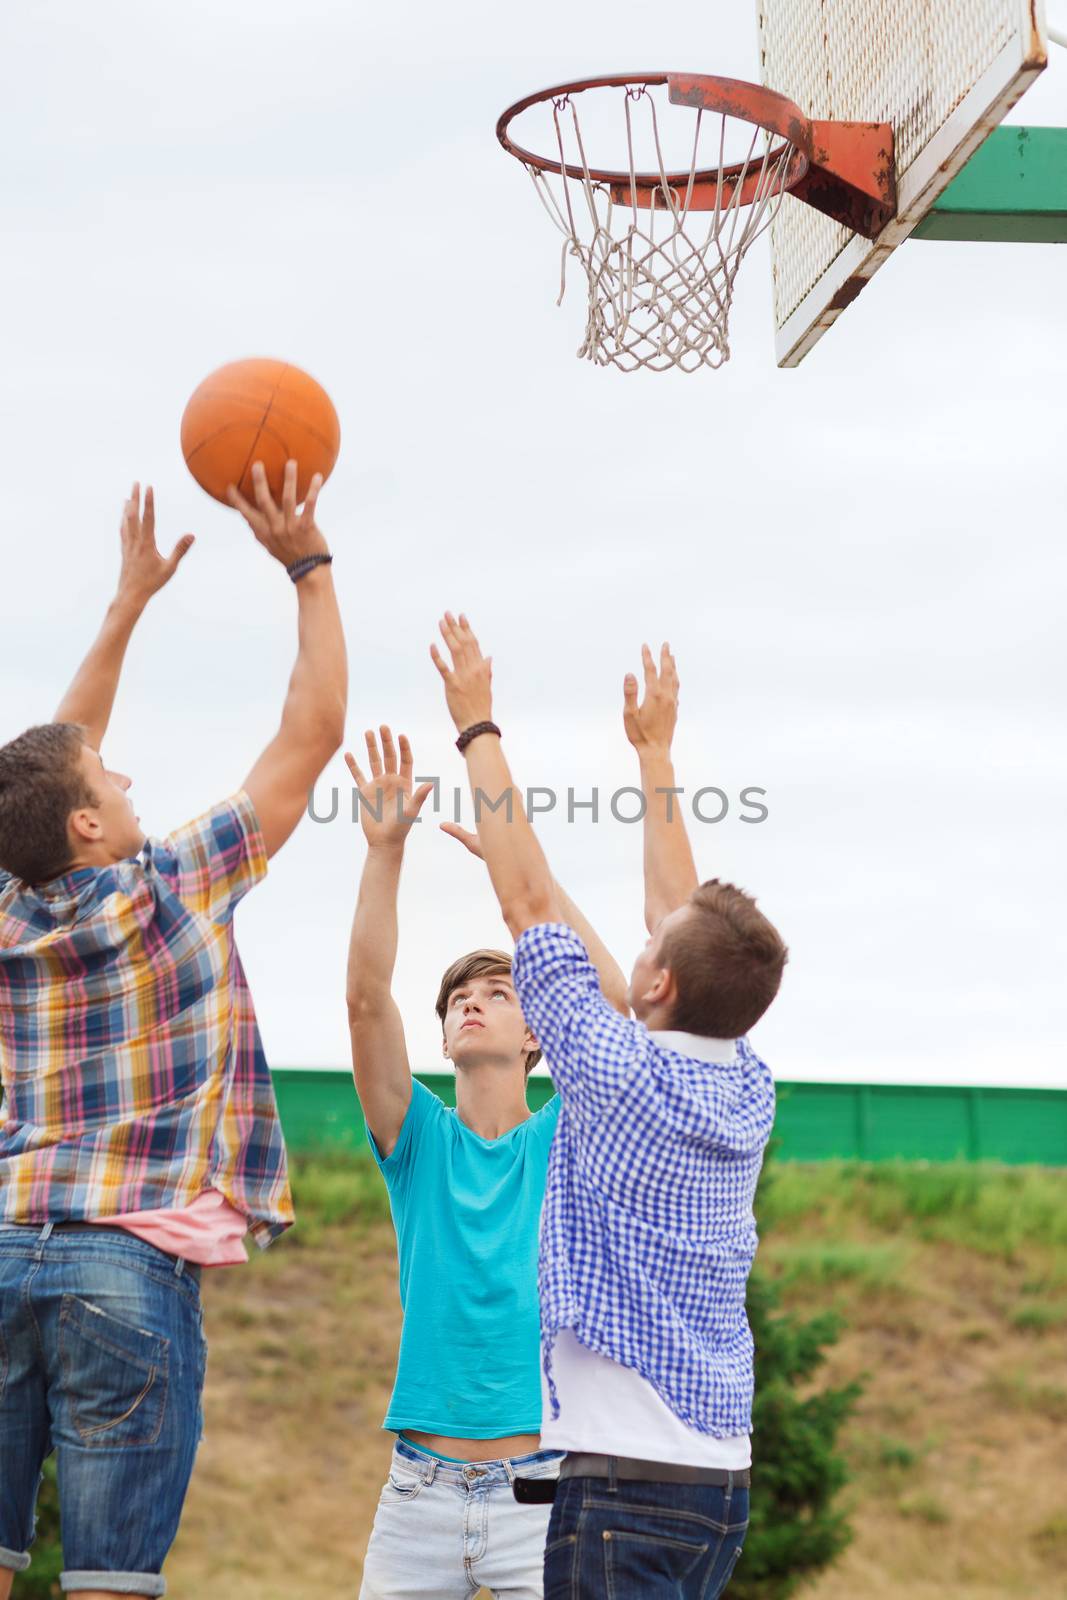 summer vacation, holidays, games and friendship concept - group of teenagers playing basketball outdoors